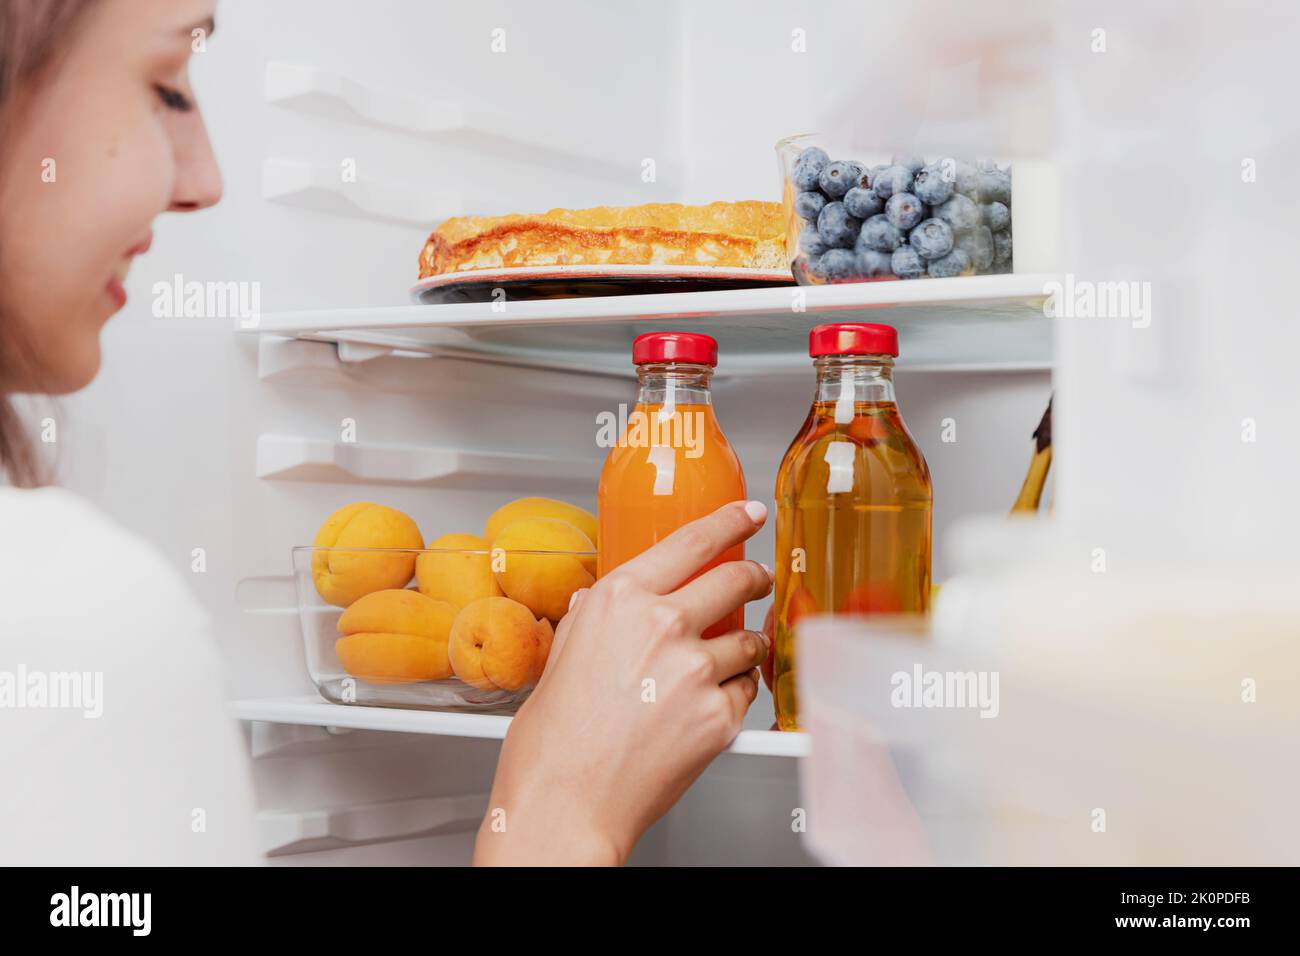 Woman hand taking, grabbing or picks up juice glass bottle out of open refrigerator shelf or fridge drawer full of fruits, vegetables, banana, peaches, yogurt. Healthy food diet, lifestyle concept Stock Photo